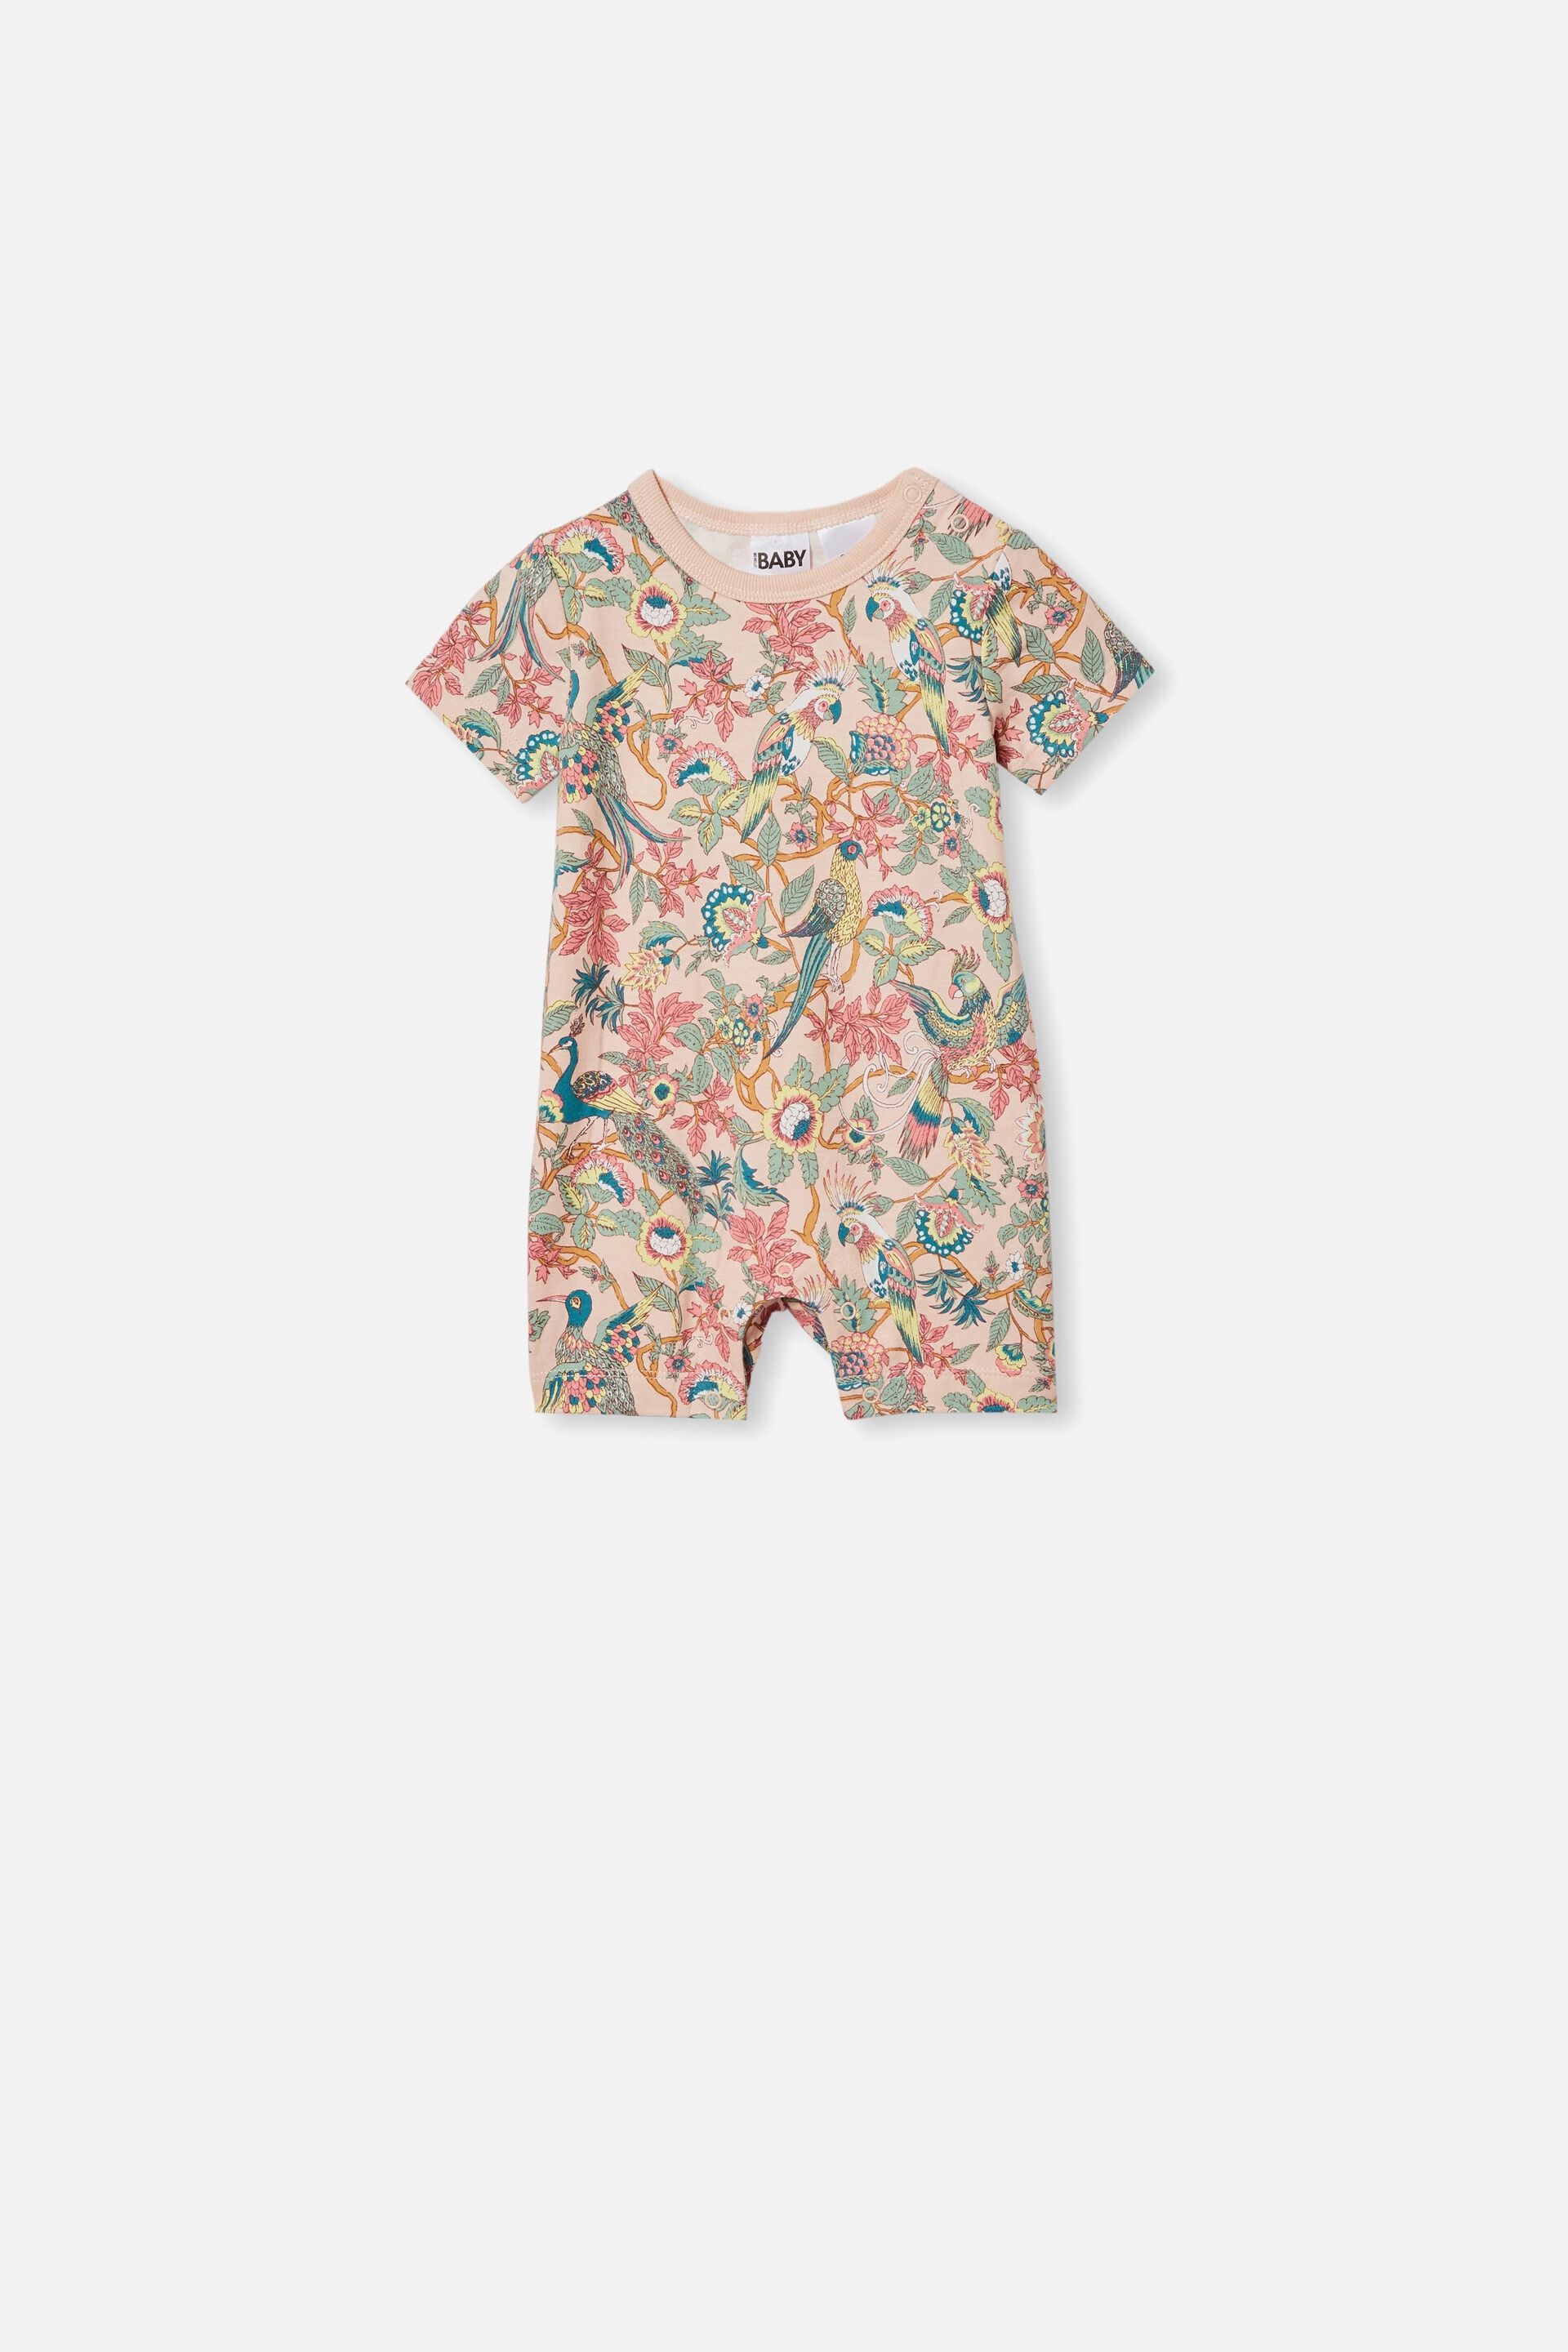 The Short Sleeve Romper | Baby Clothes 